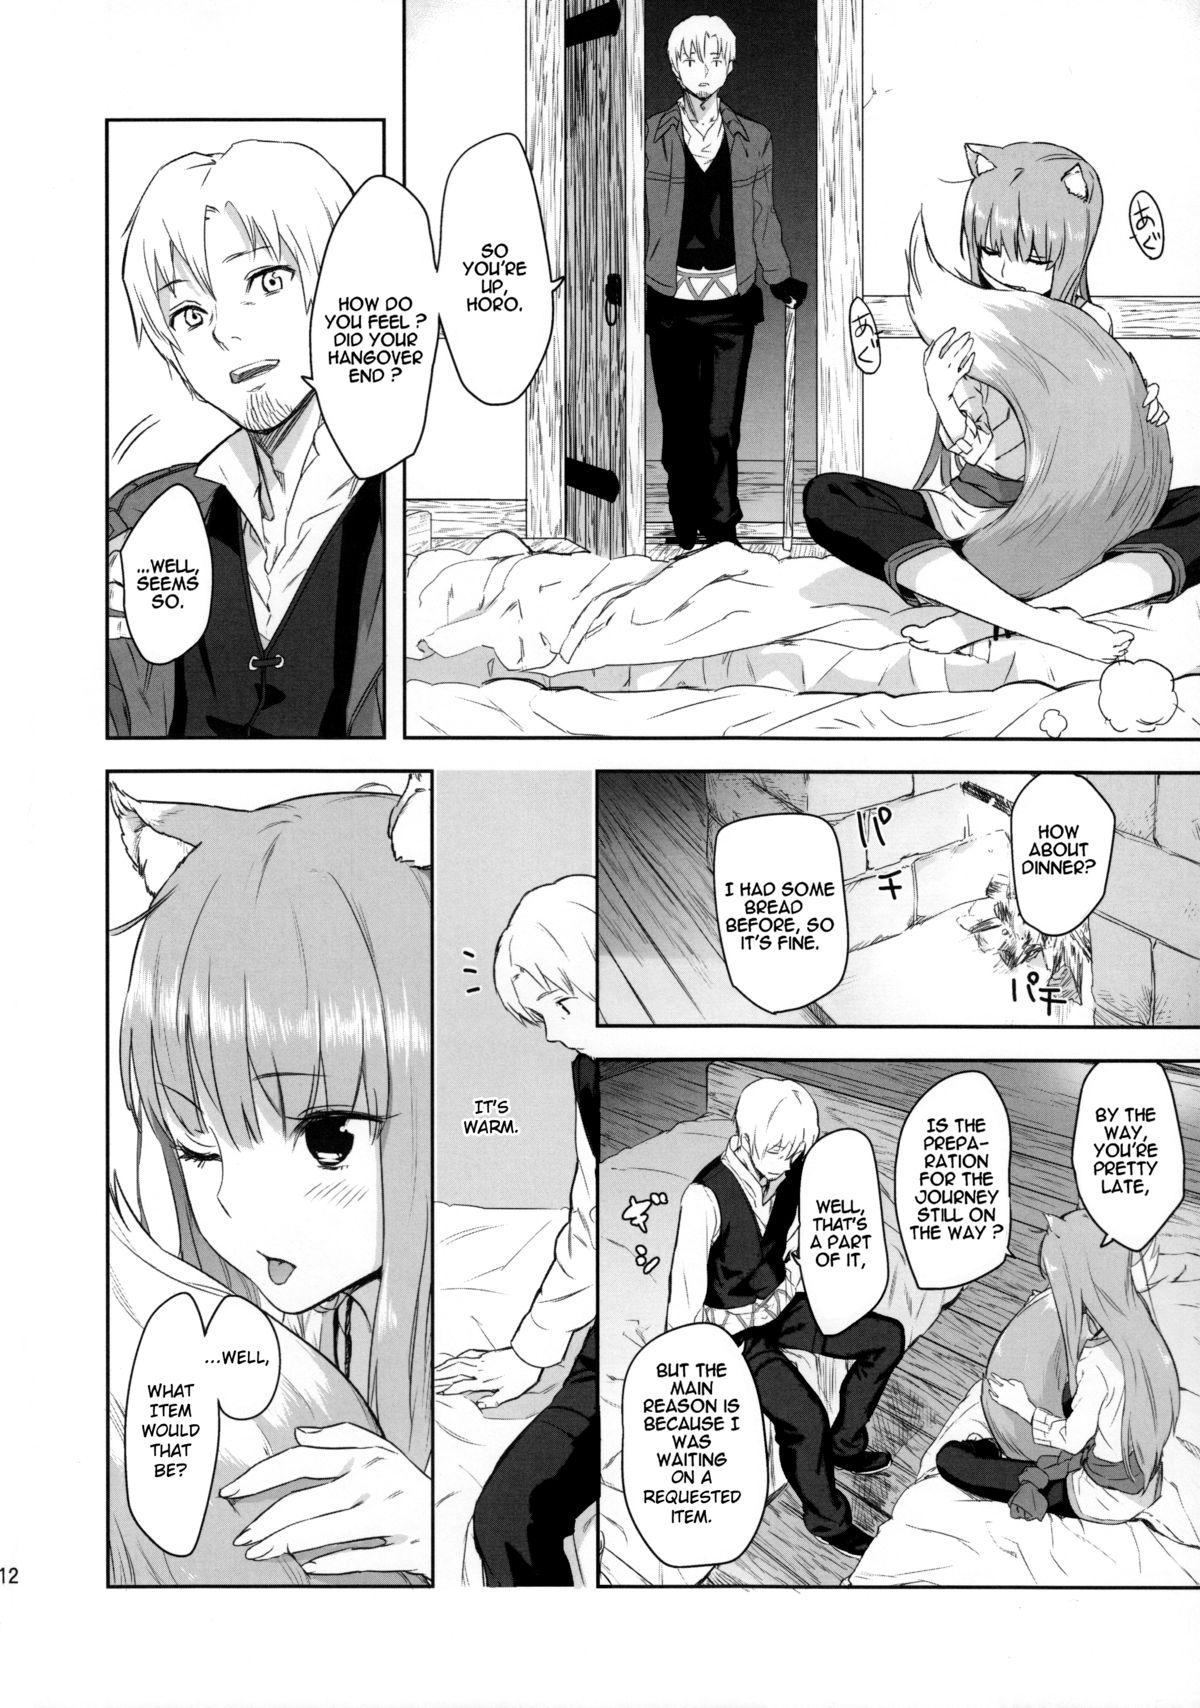 Slutty Harvest II - Spice and wolf Bokep - Page 12